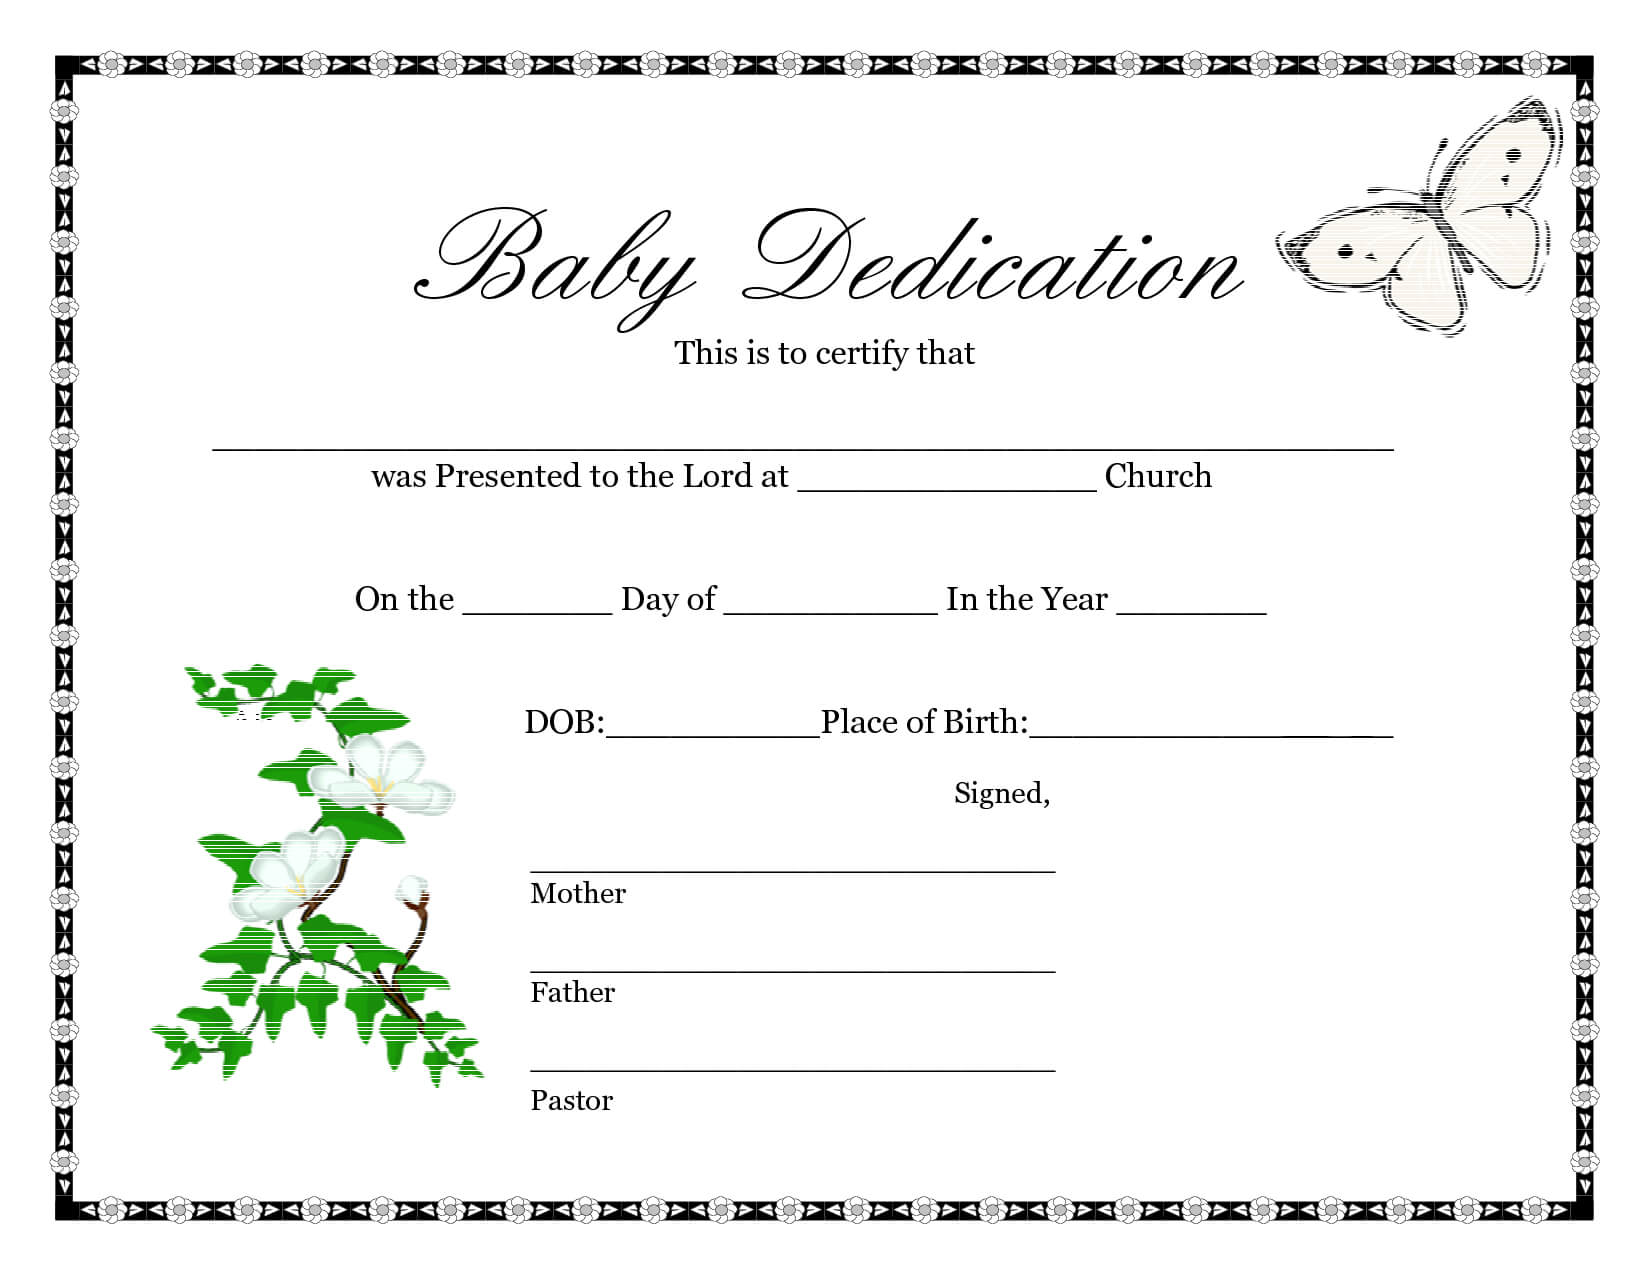 Downloadable Blank Birth Certificate Template Sample : V M D For Fake Birth Certificate Template